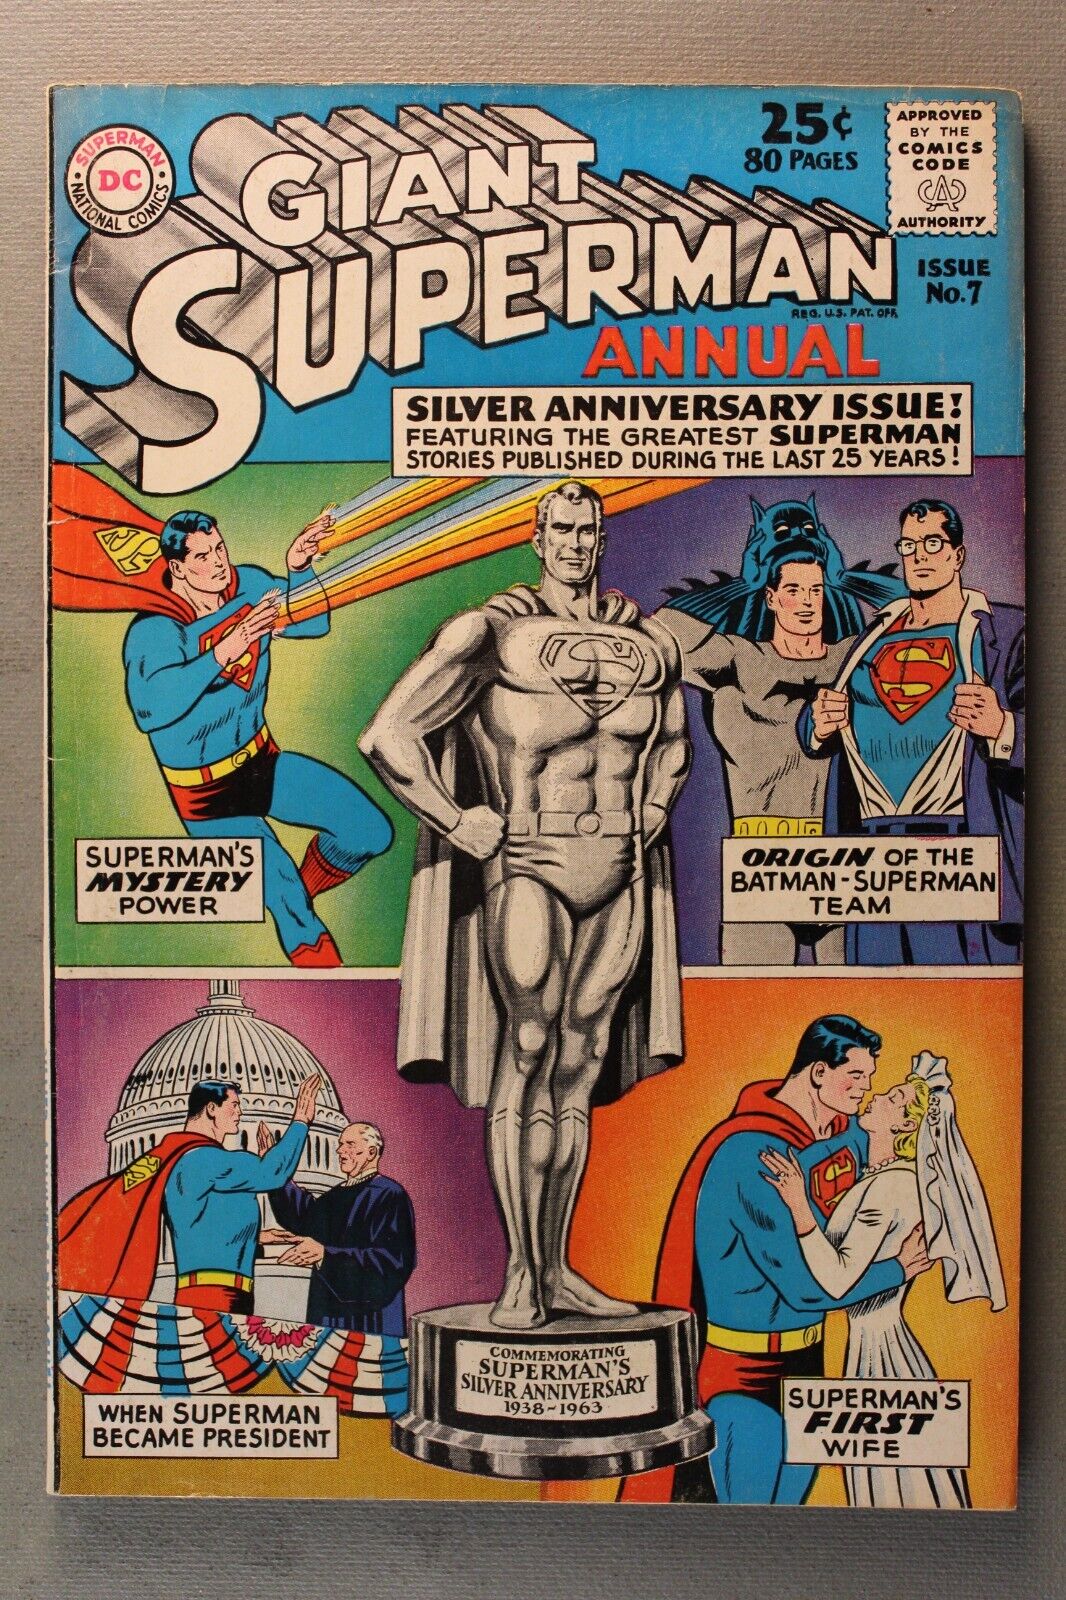 GIANT SUPERMAN ANNUAL No. 7 *1963* Silver Anniversary Issue ~ 1938-1963 ~ Solid